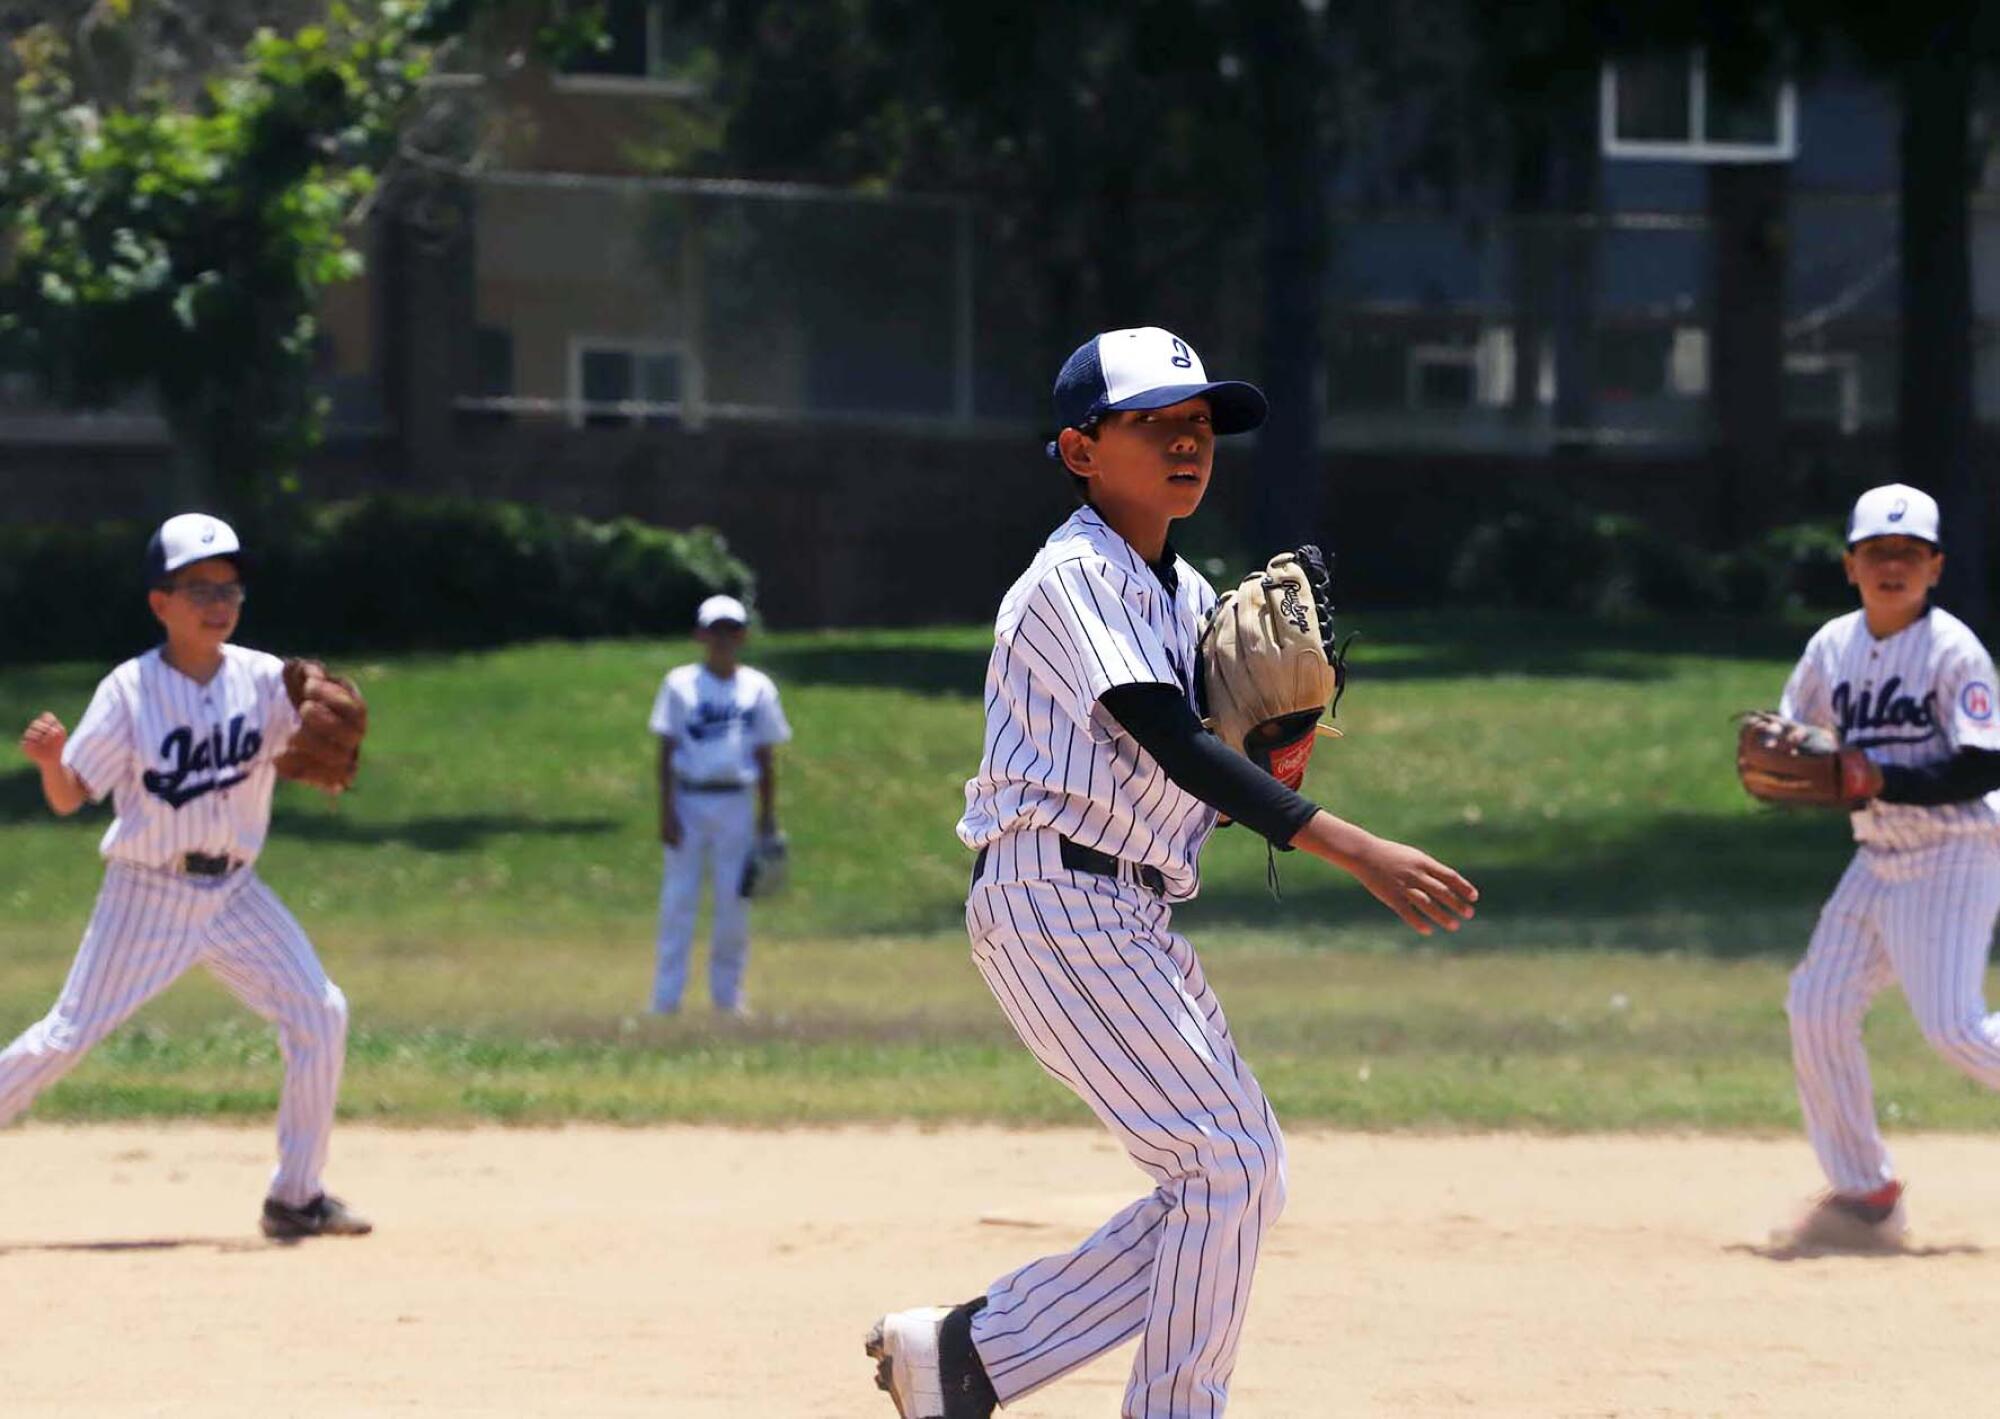 Youth baseball player throws a pitch